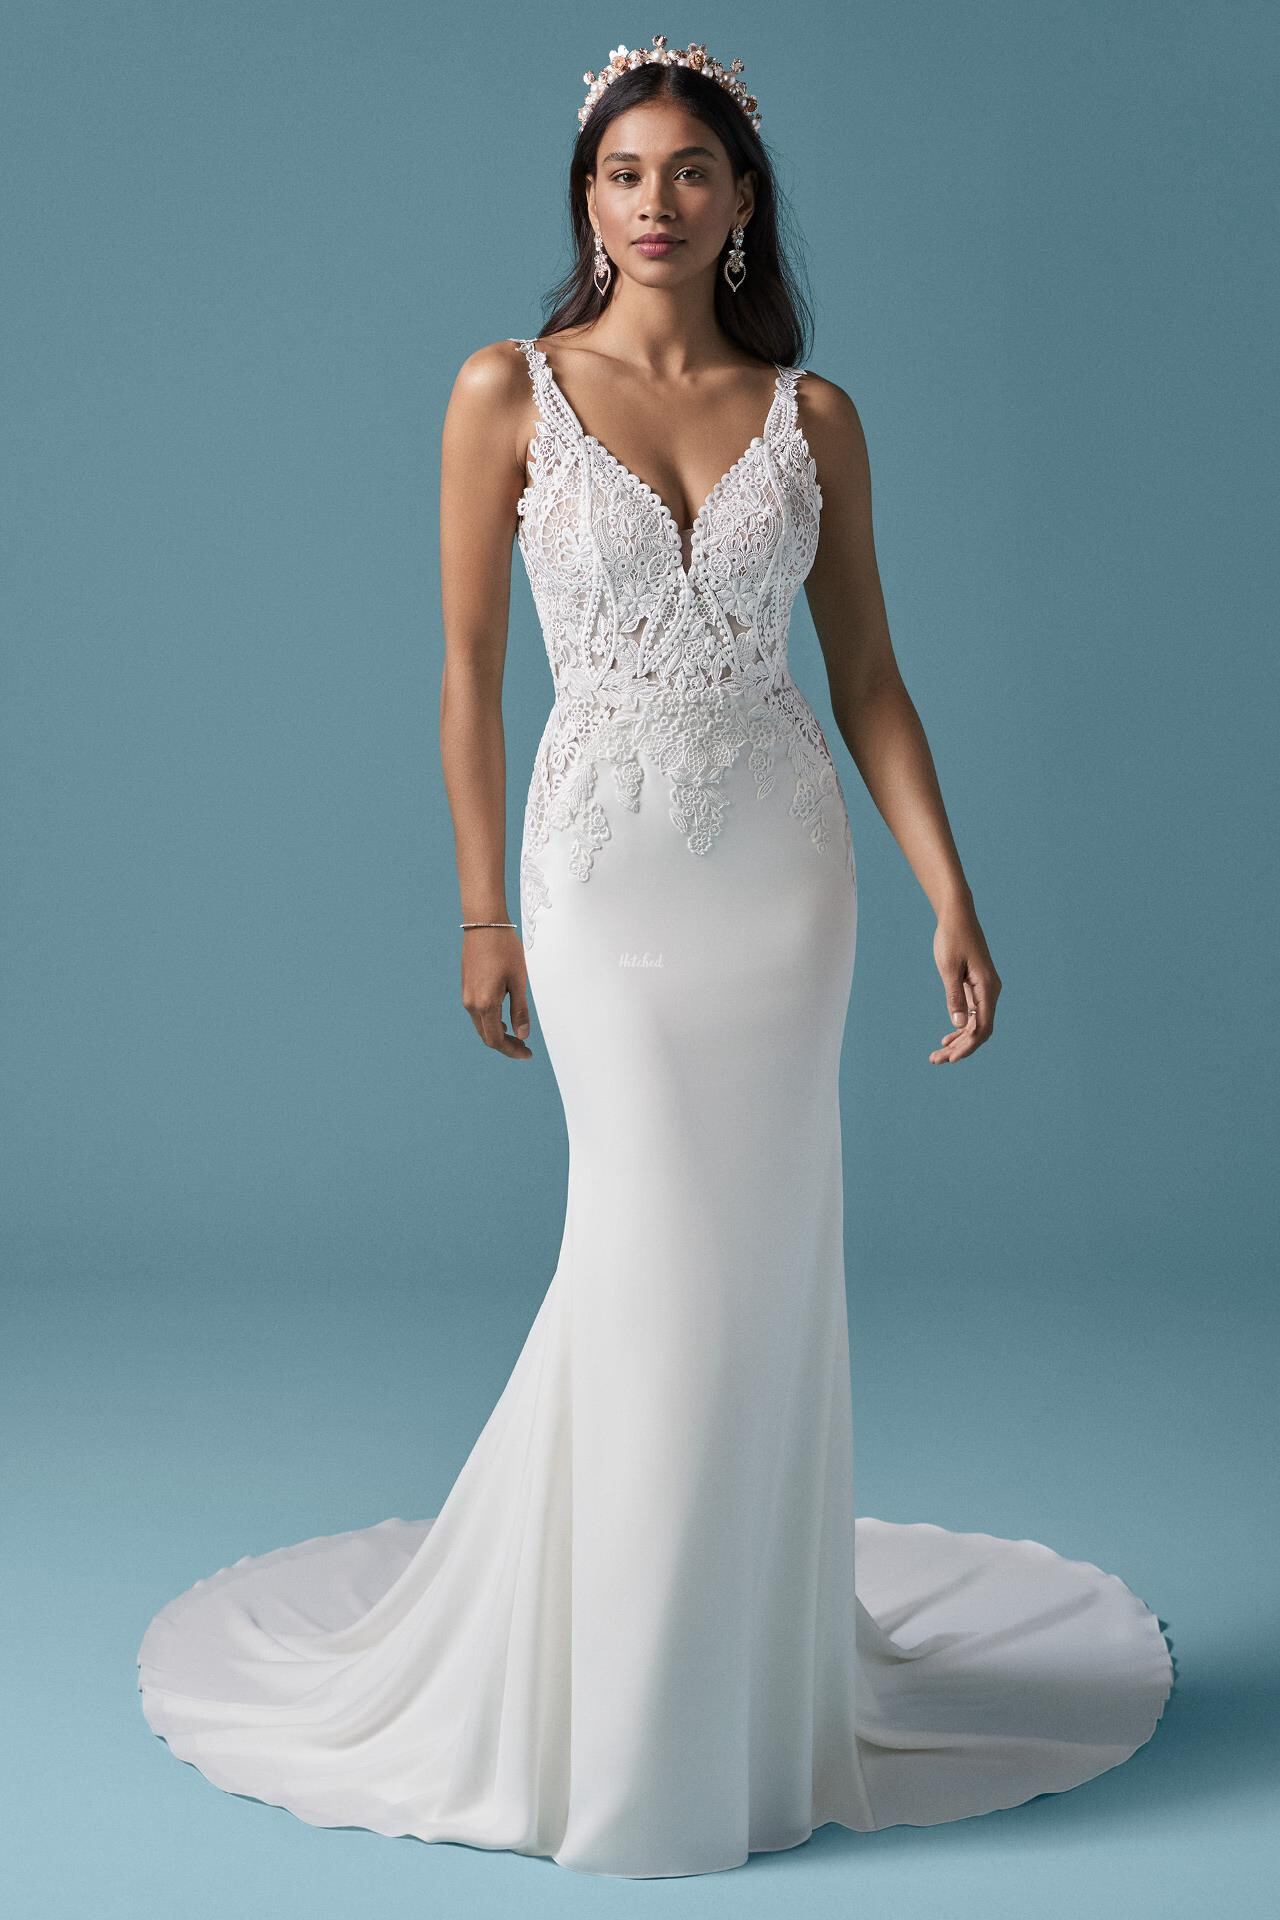 Maggie Sottero Wedding Dresses - Page 3 | hitched.co.uk